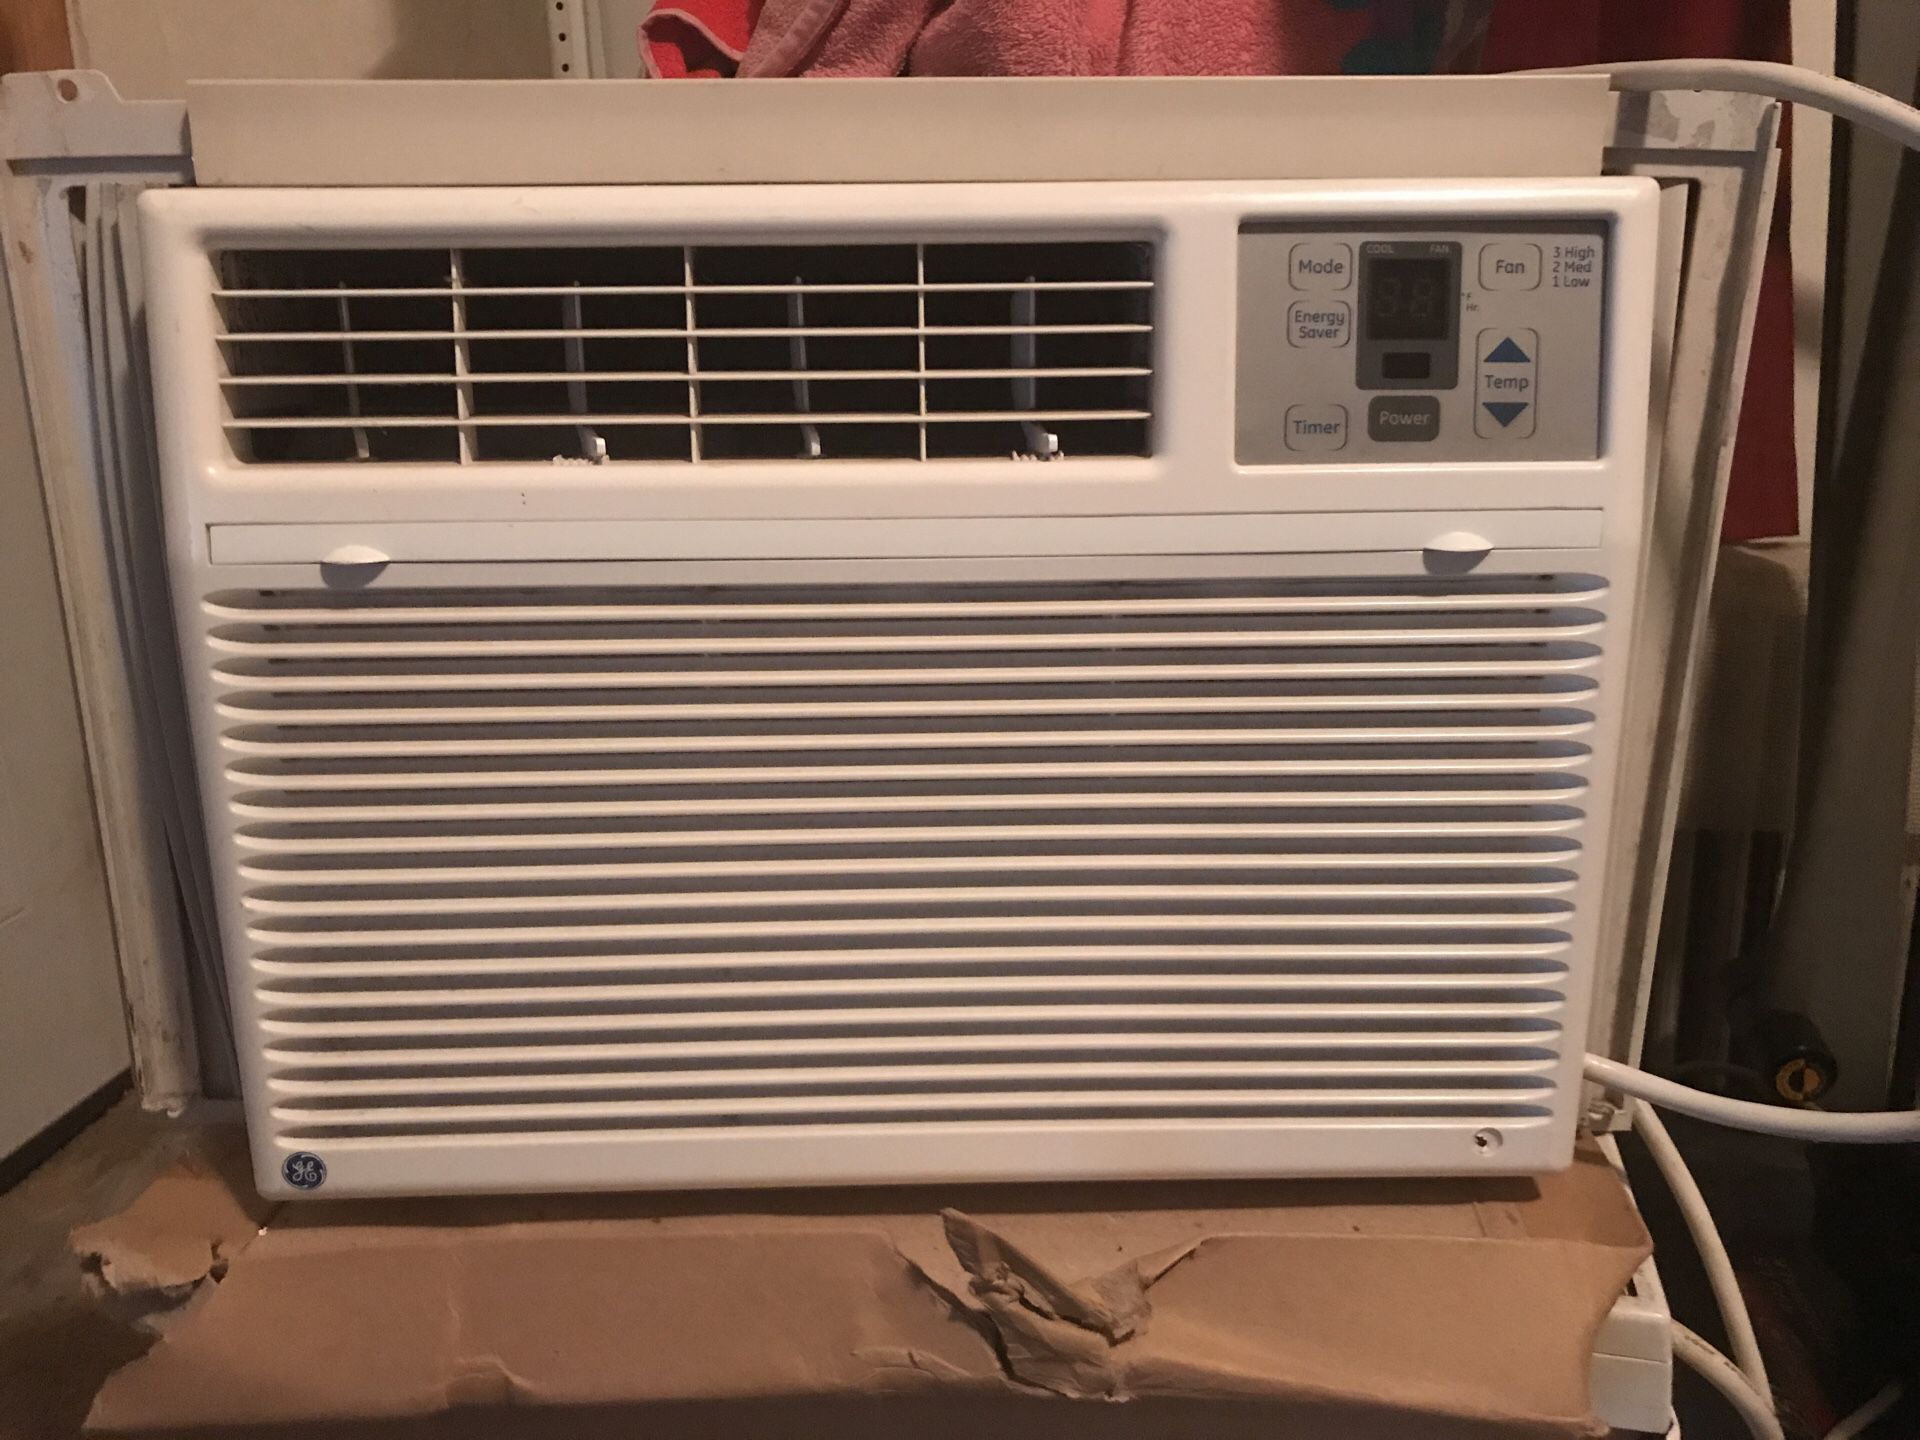 5050 BTU air conditioner in excellent condition blows very cold air